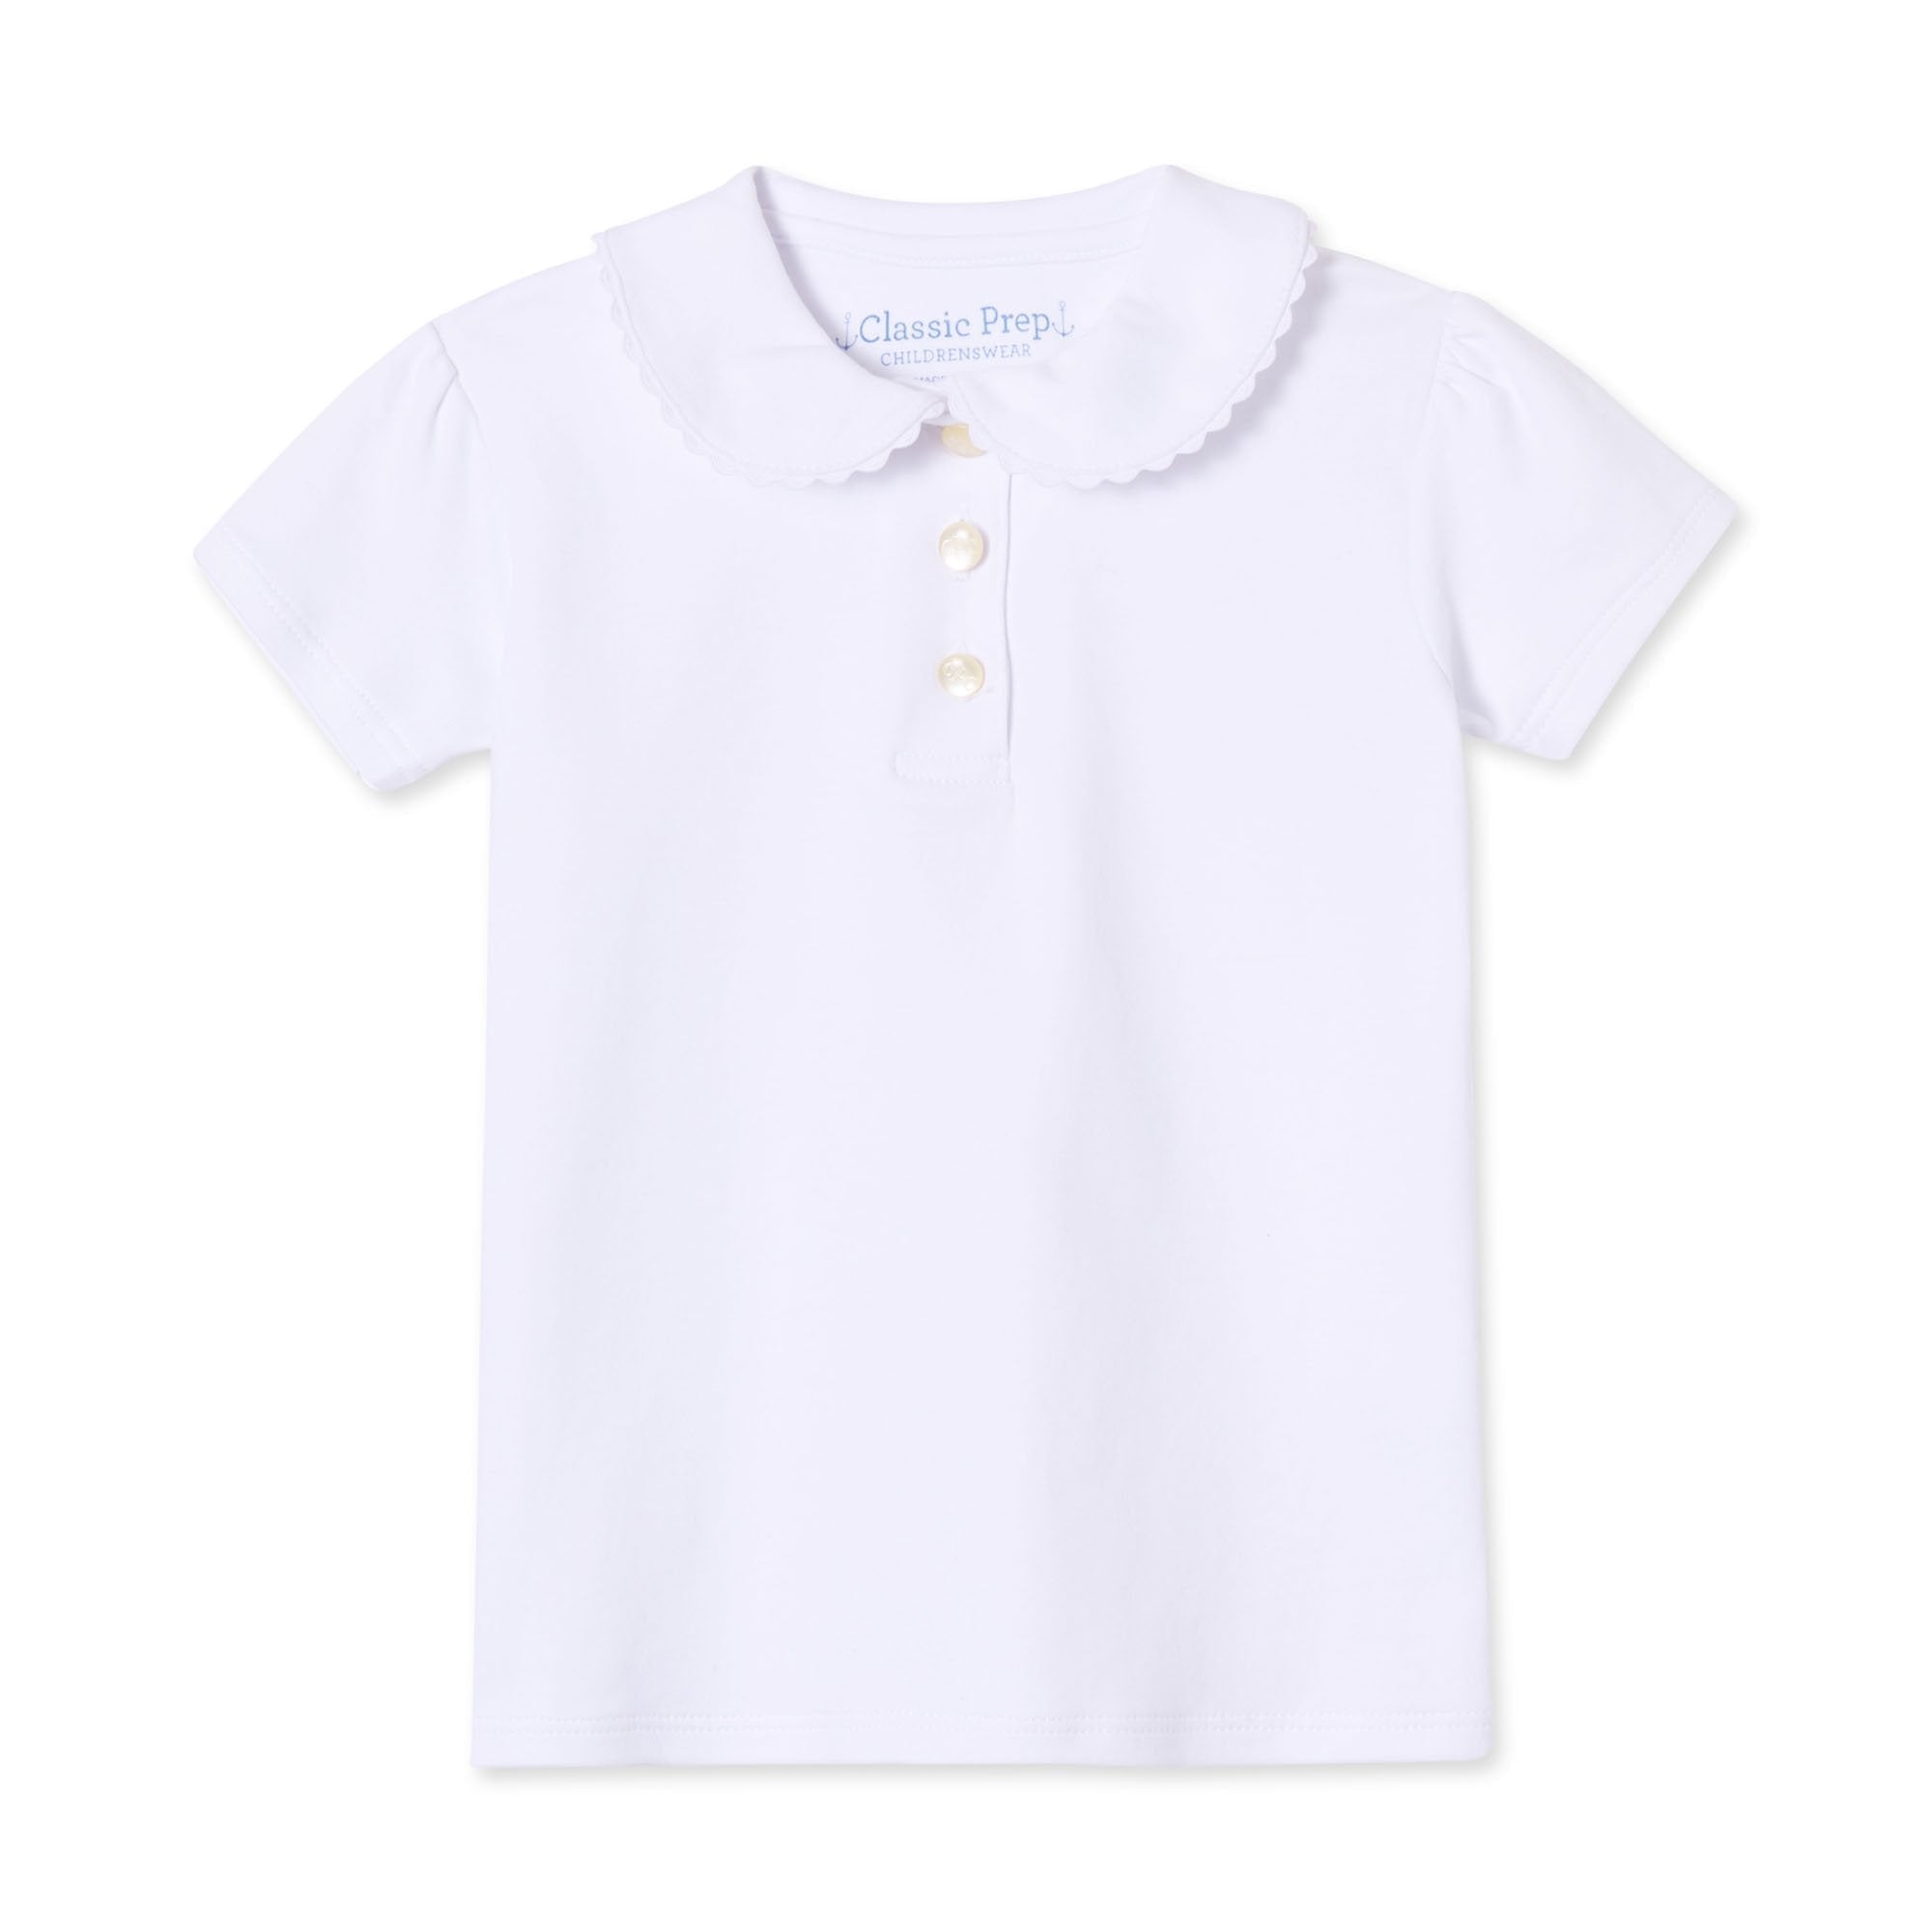 Classic and Preppy Sarah Short Sleeve Polo, Bright White-Shirts and Tops-Bright White-2T-CPC - Classic Prep Childrenswear